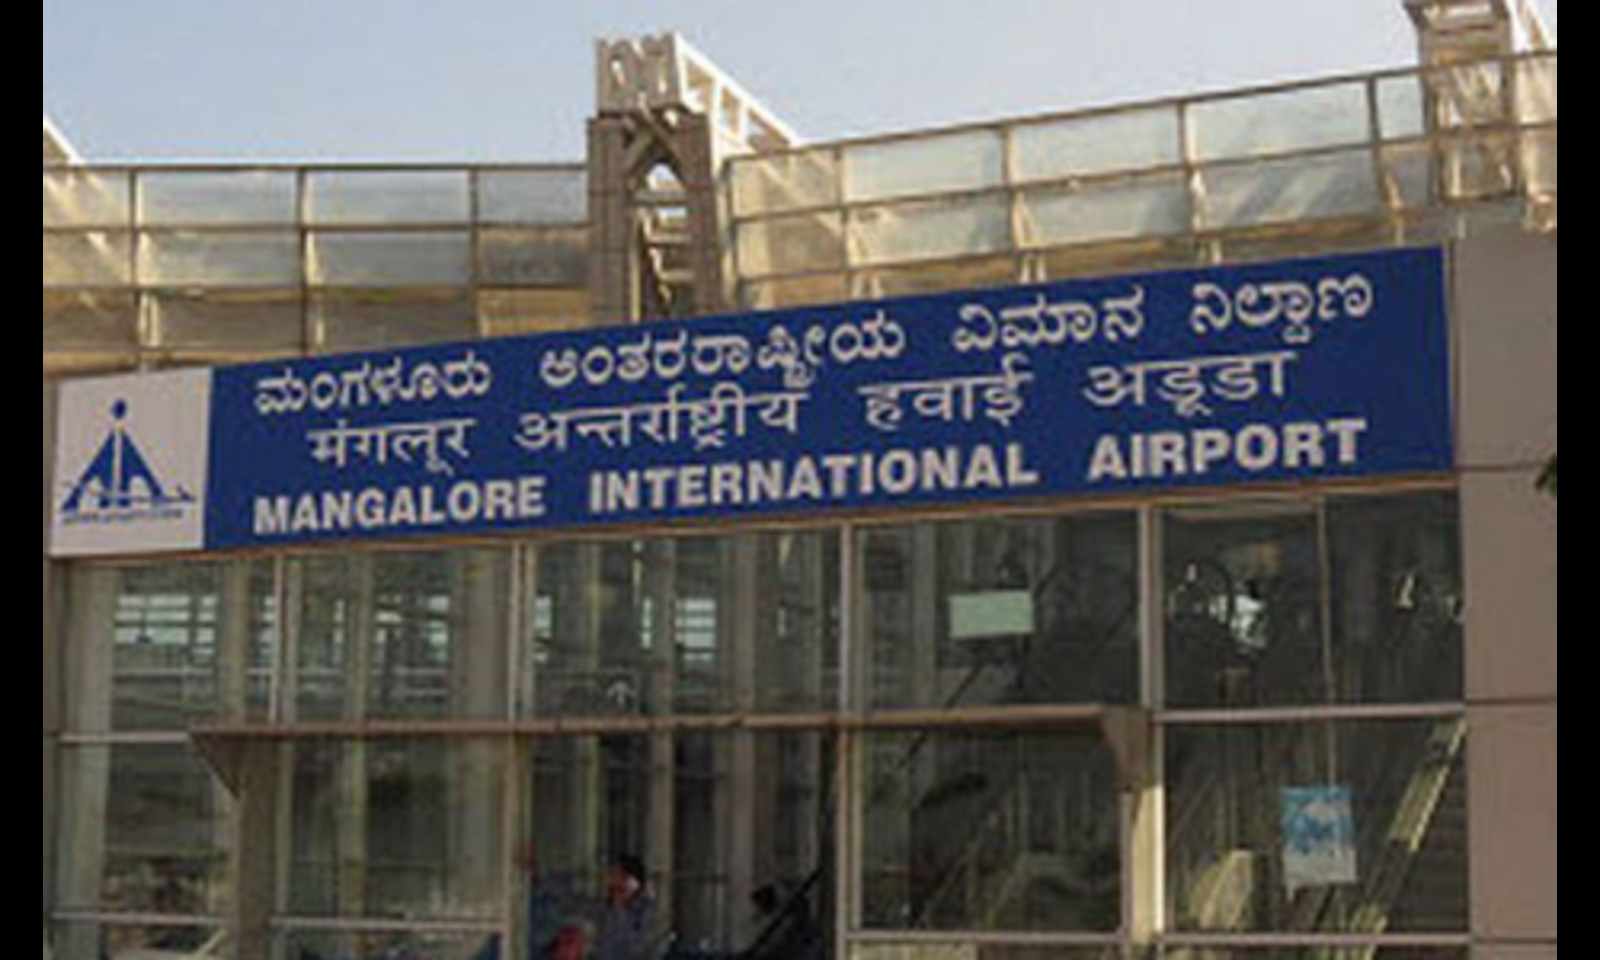 Live bomb found near ticket counters of Mangaluru airport